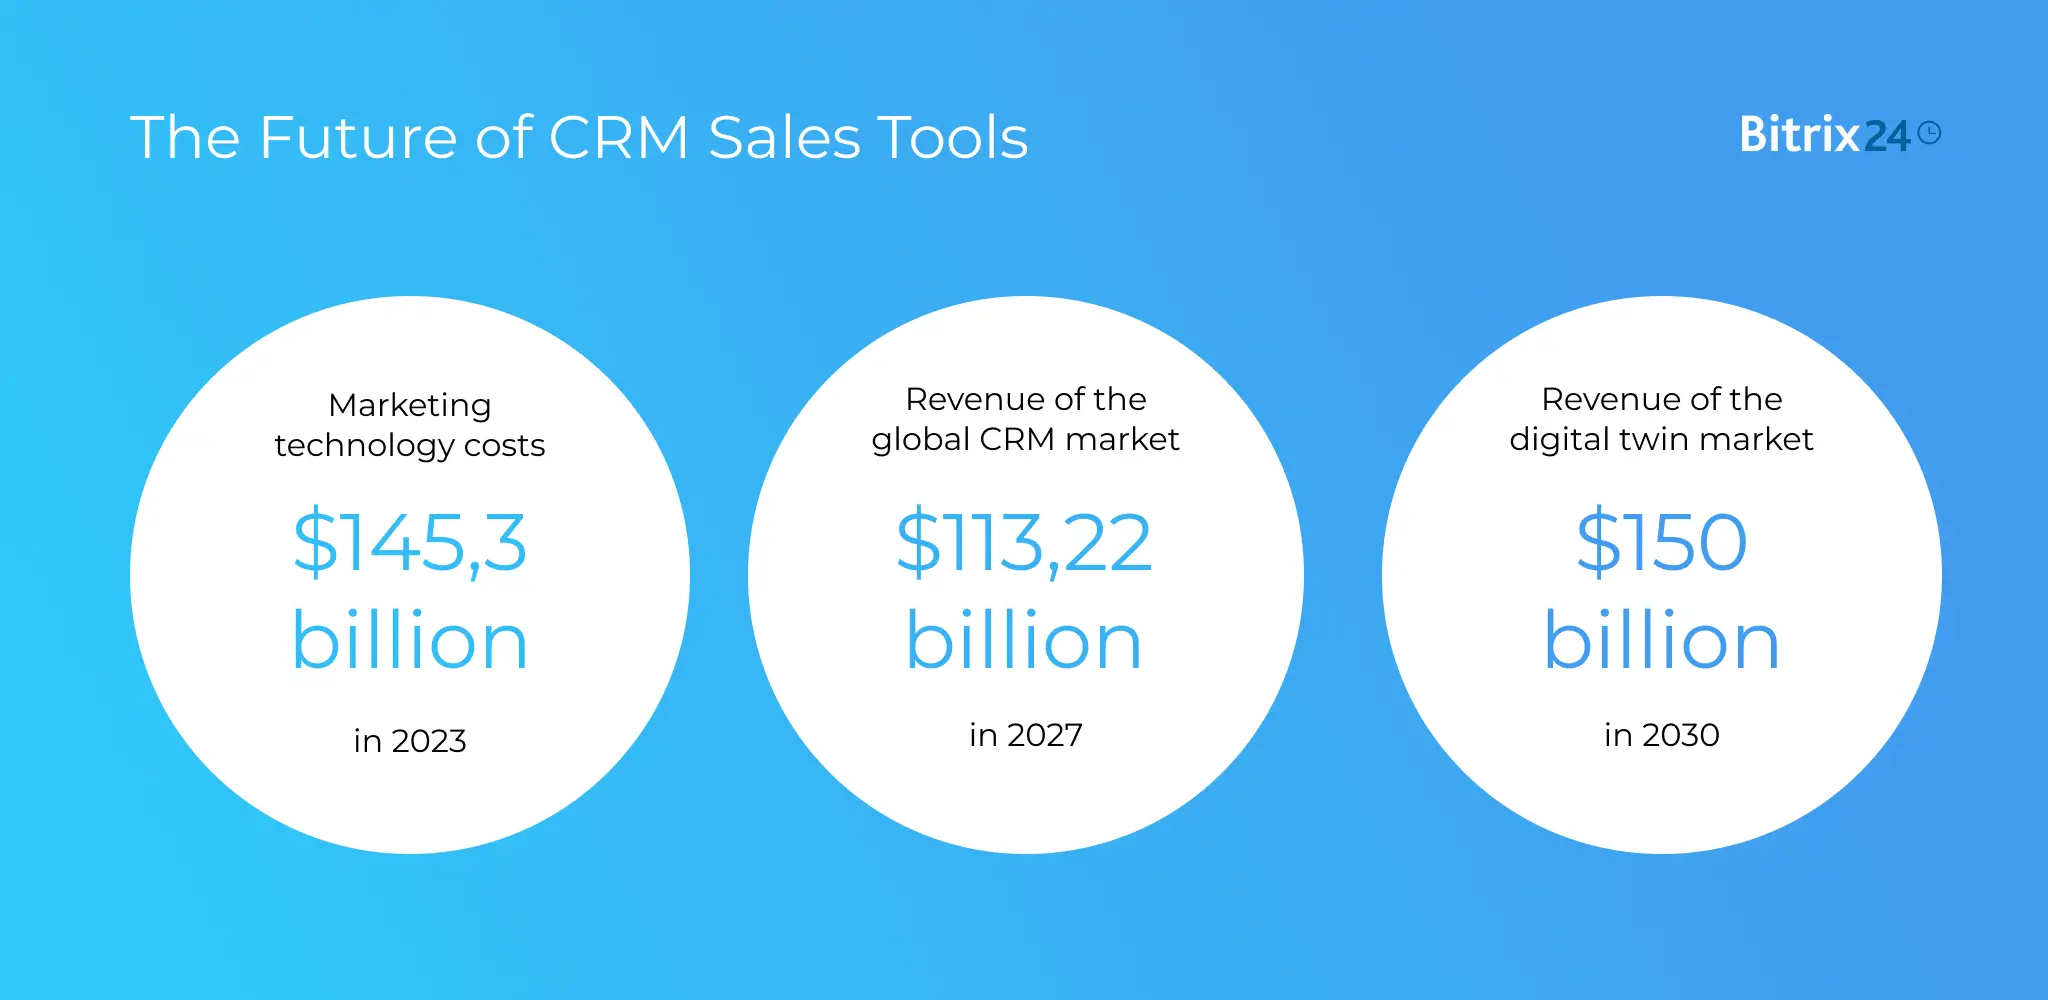 The Future of CRM Sales Tools